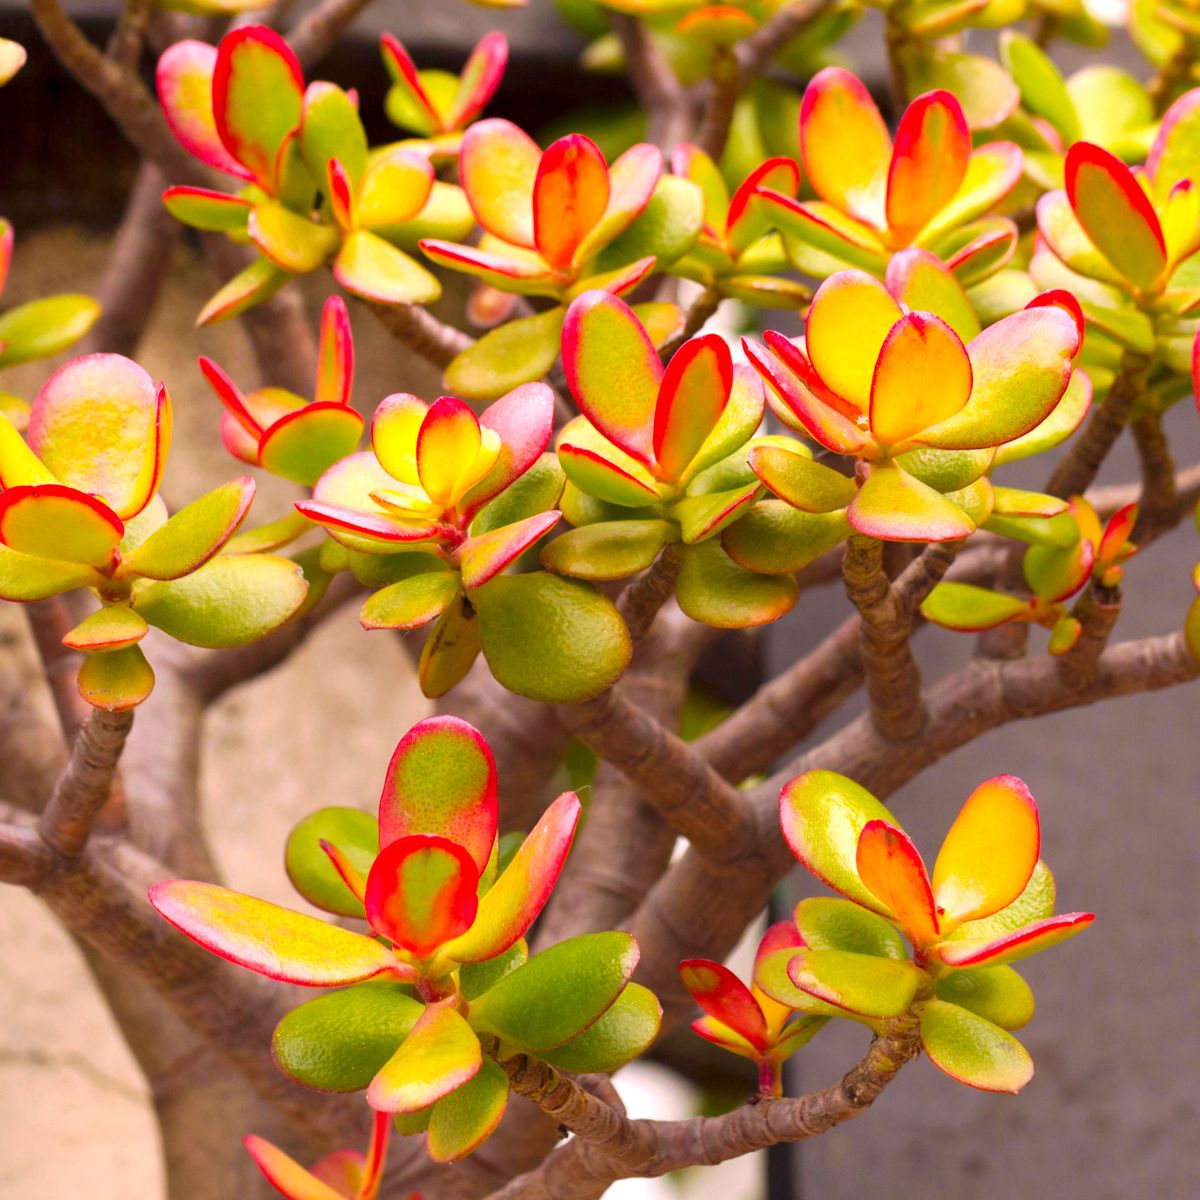 Grow These 8 Lunar New Year Plants For The Year Of The Dragon